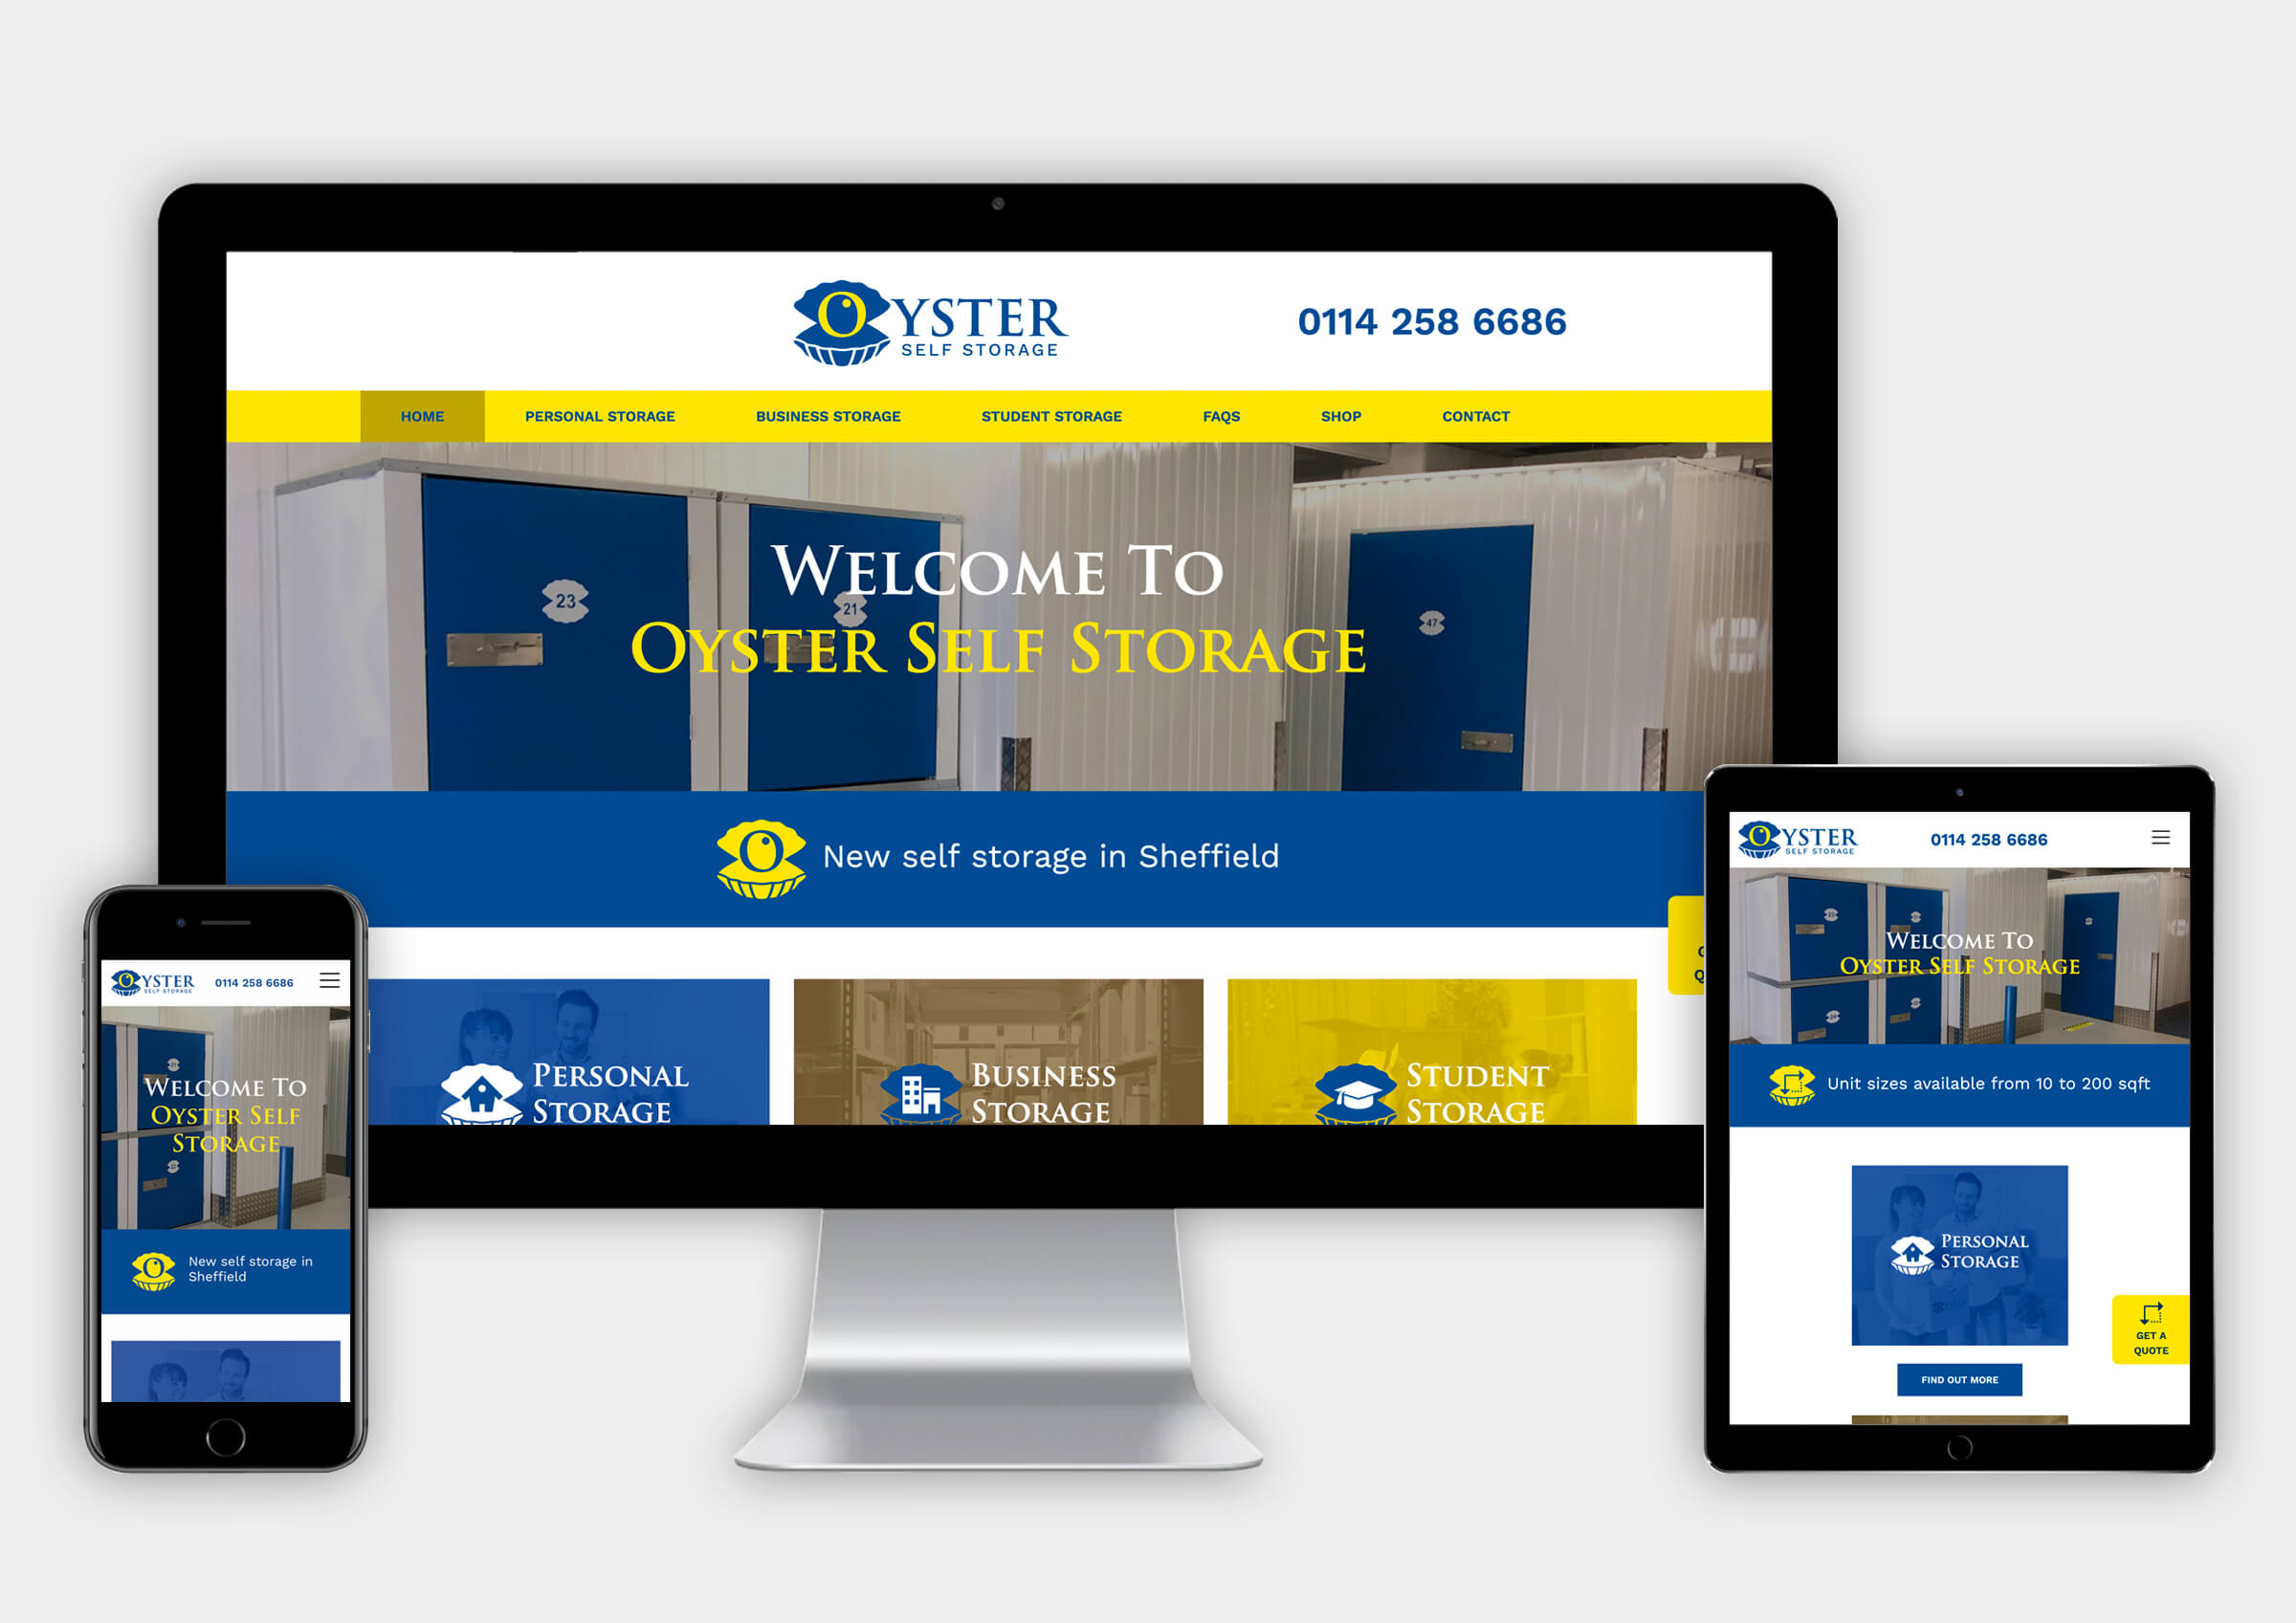 Oyster Self Storage website designs for screen, table and mobile